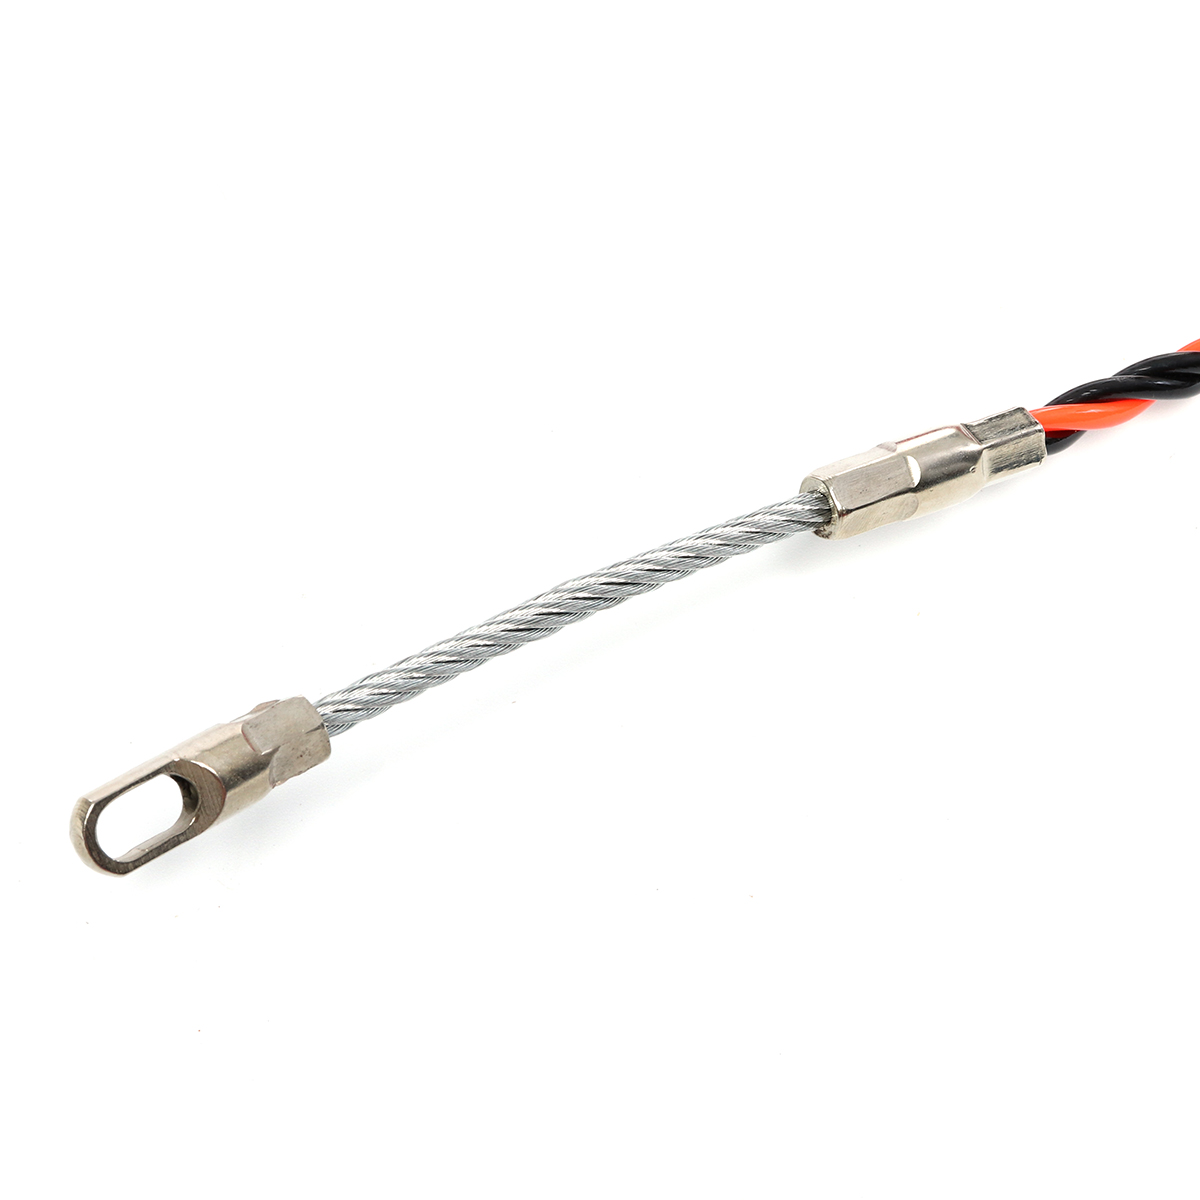 30M-5mm-Cable-Push-Puller-Conduit-Snake-Cable-Rodder-Fish-Tape-Wire-Guide-1392858-7